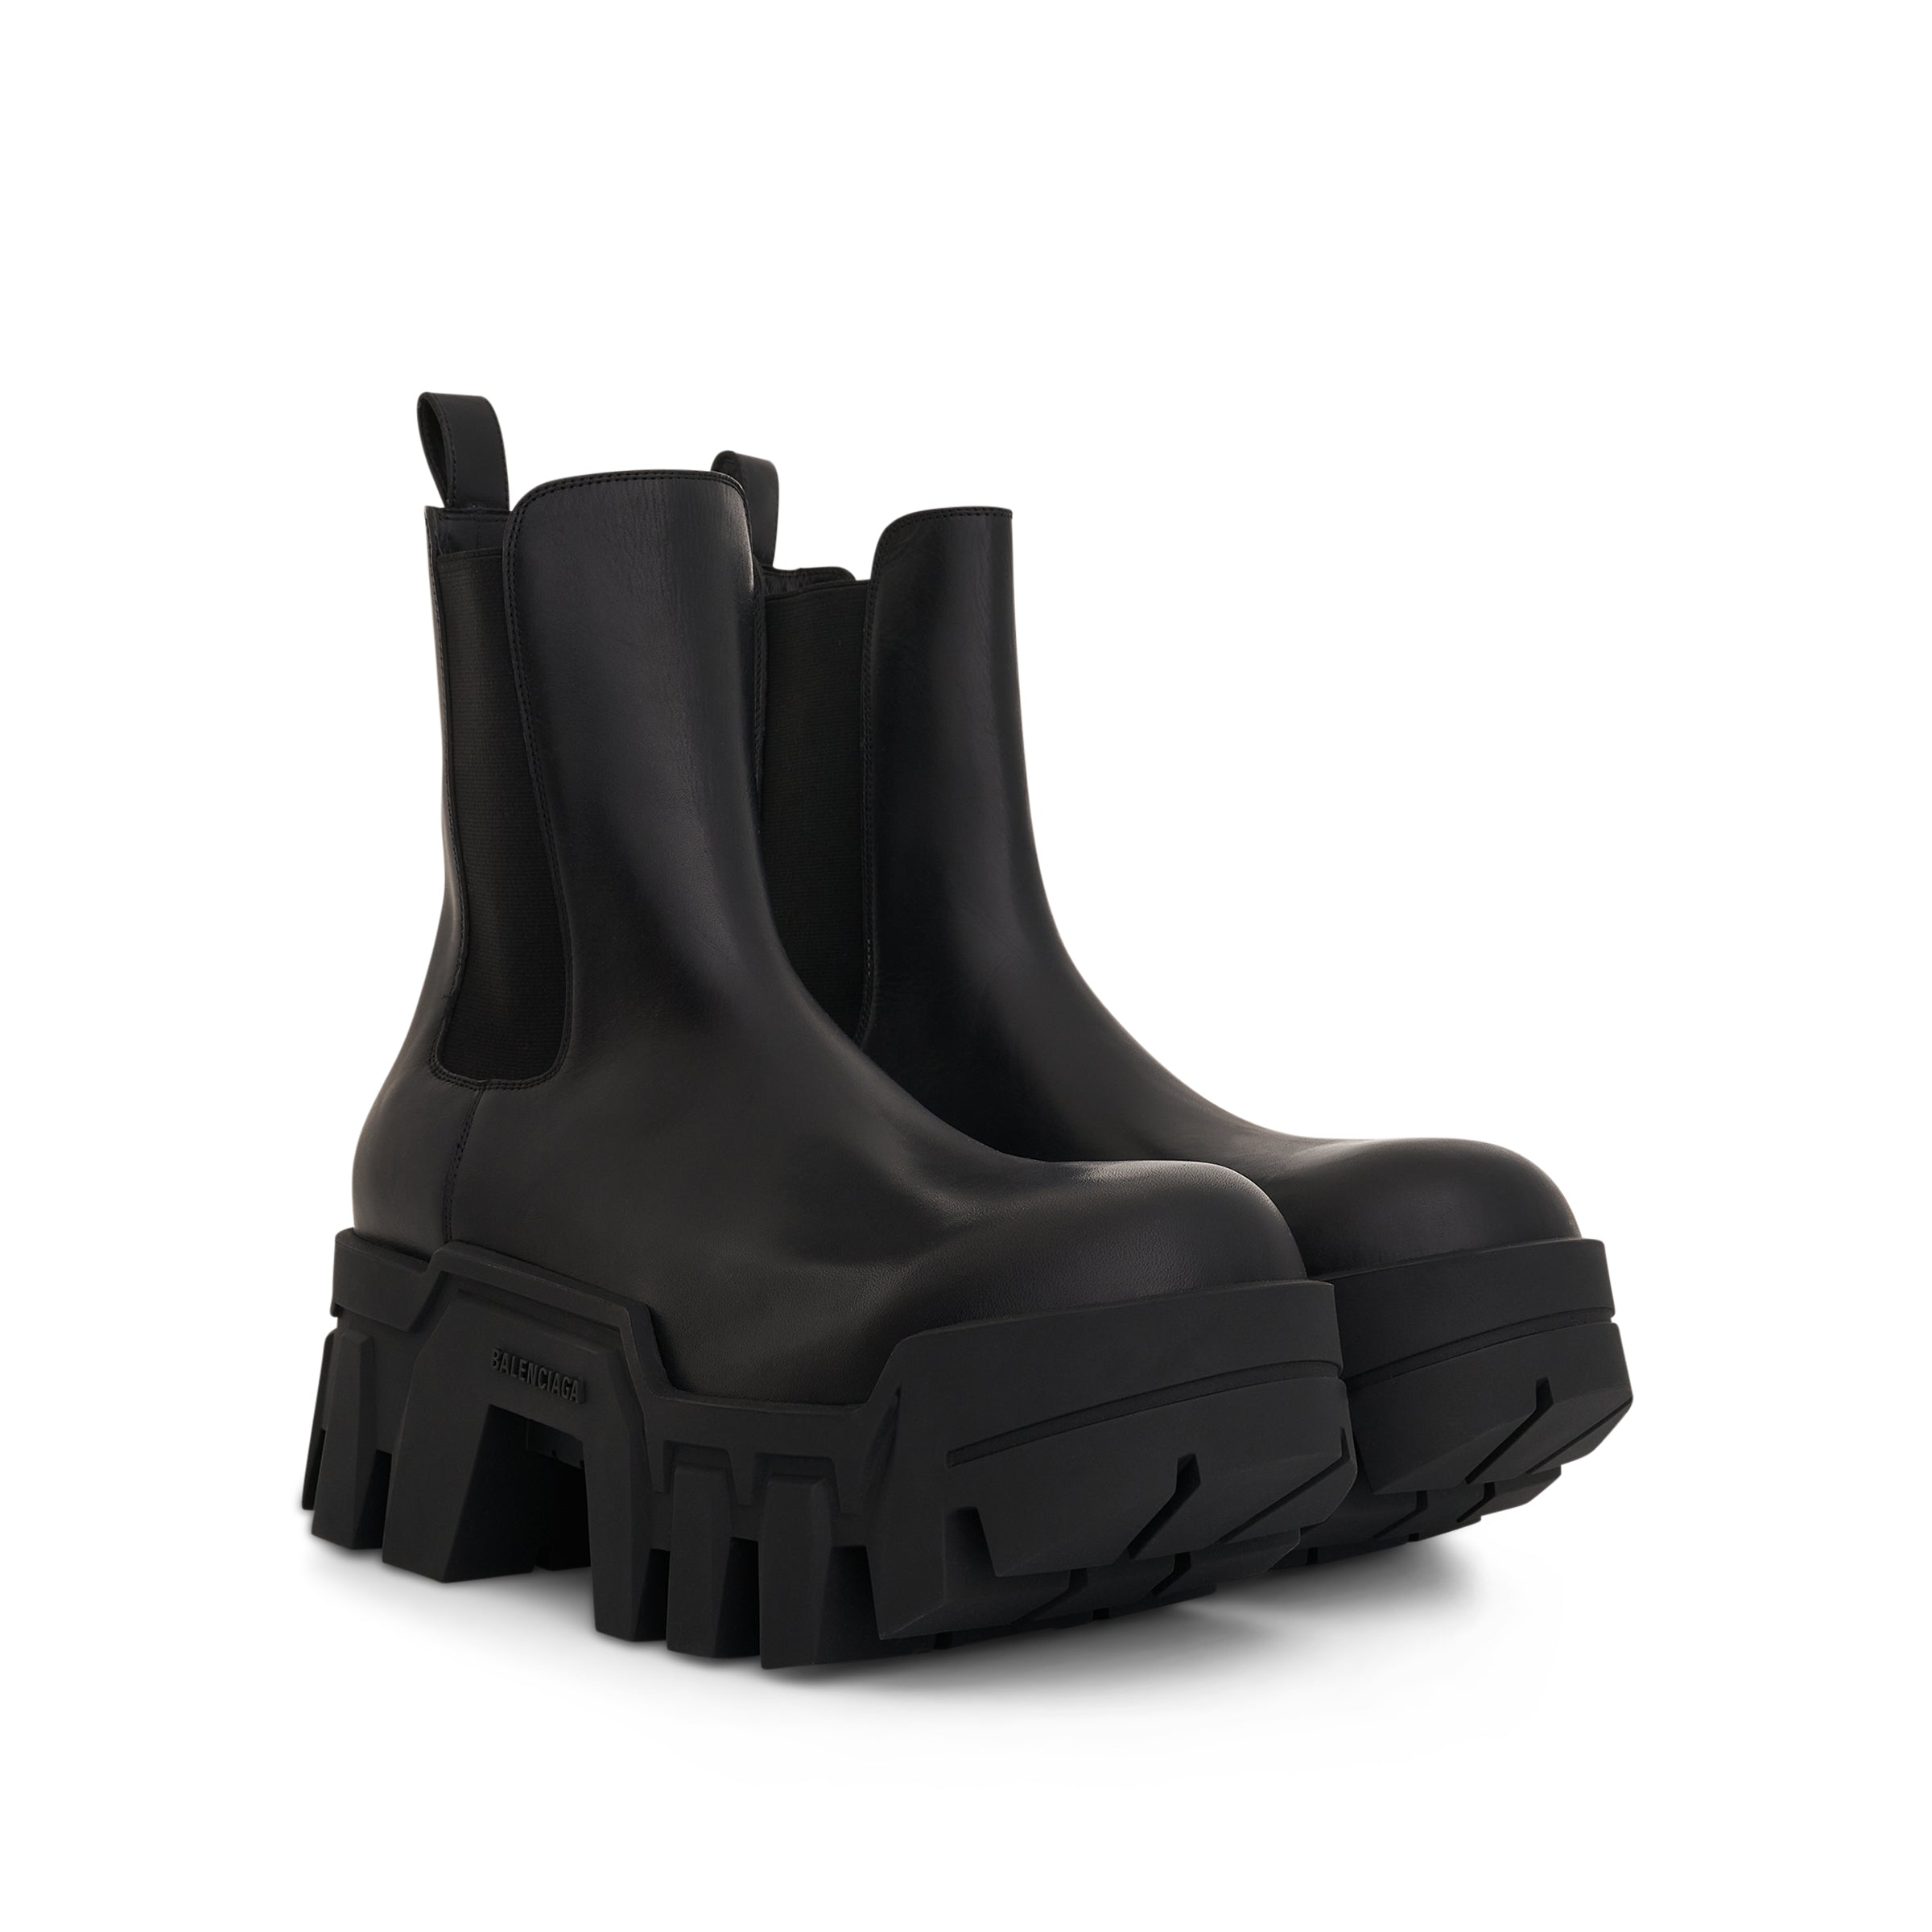 balenciaga bulldozer chelsea boot in black sold out sold out sale earn ...